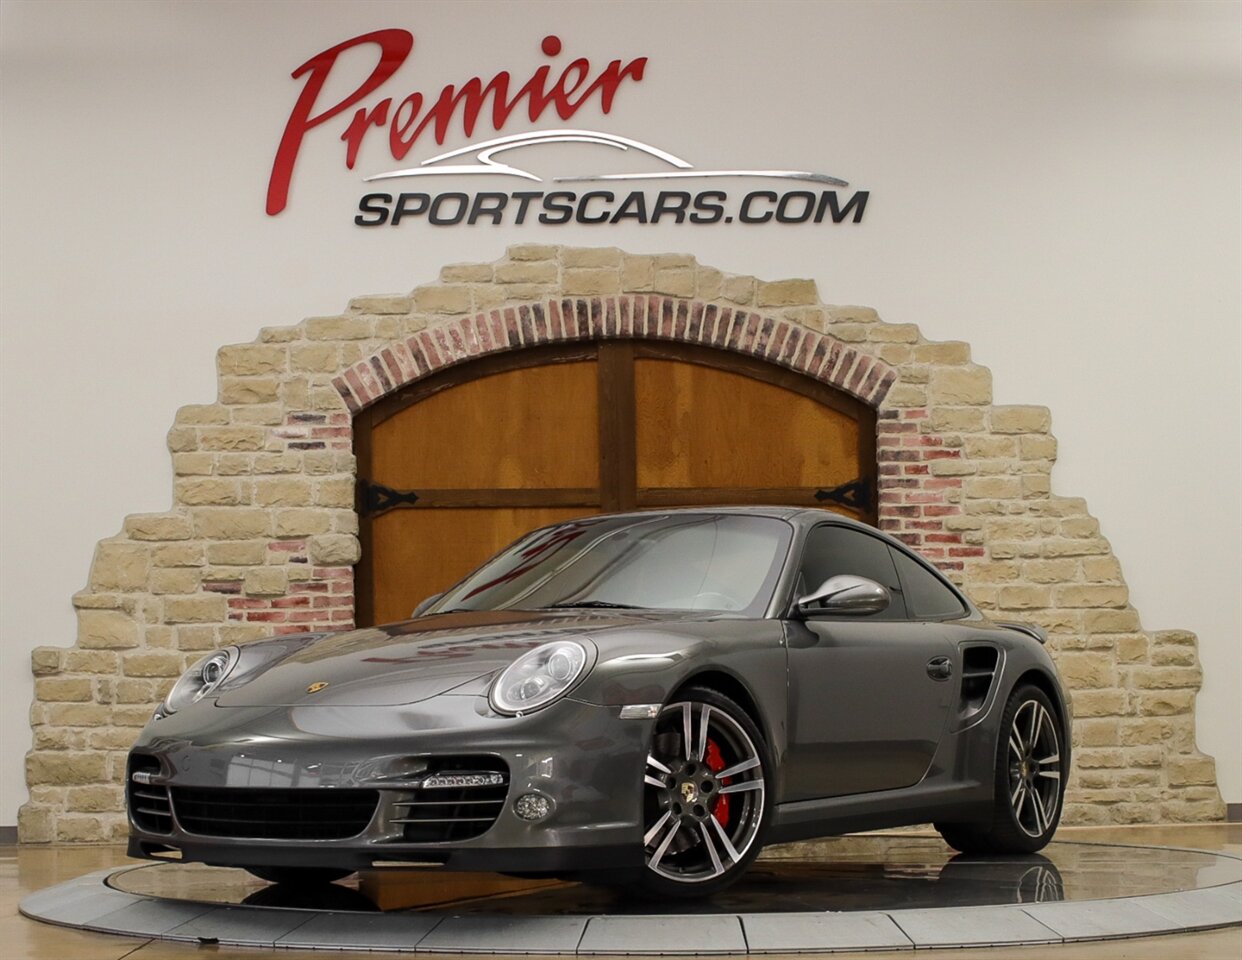 2011 Porsche 911 Turbo  (One of the last manual turbo's produced by Porsche) - Photo 1 - Springfield, MO 65802